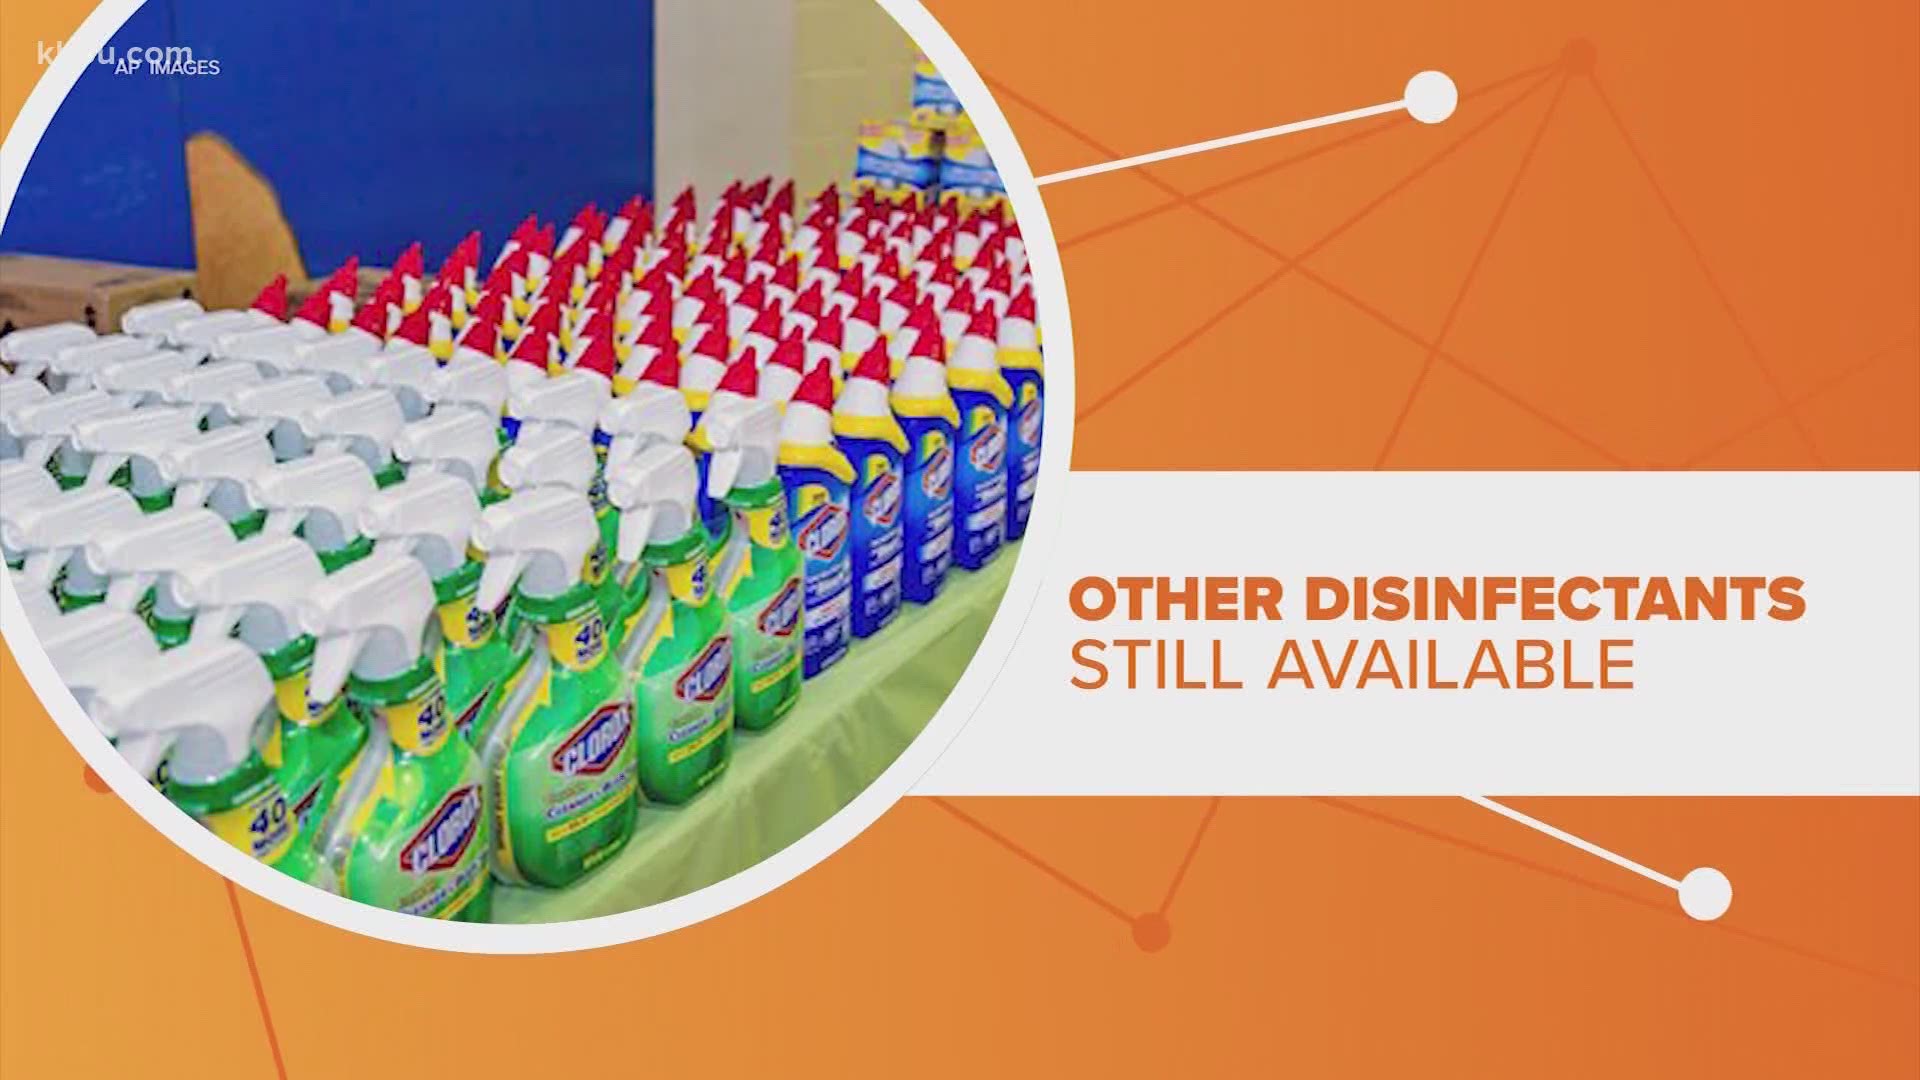 Supply chain issues are making it hard for companies to keep popular disinfectant products on the shelves. Let's connect the dots.